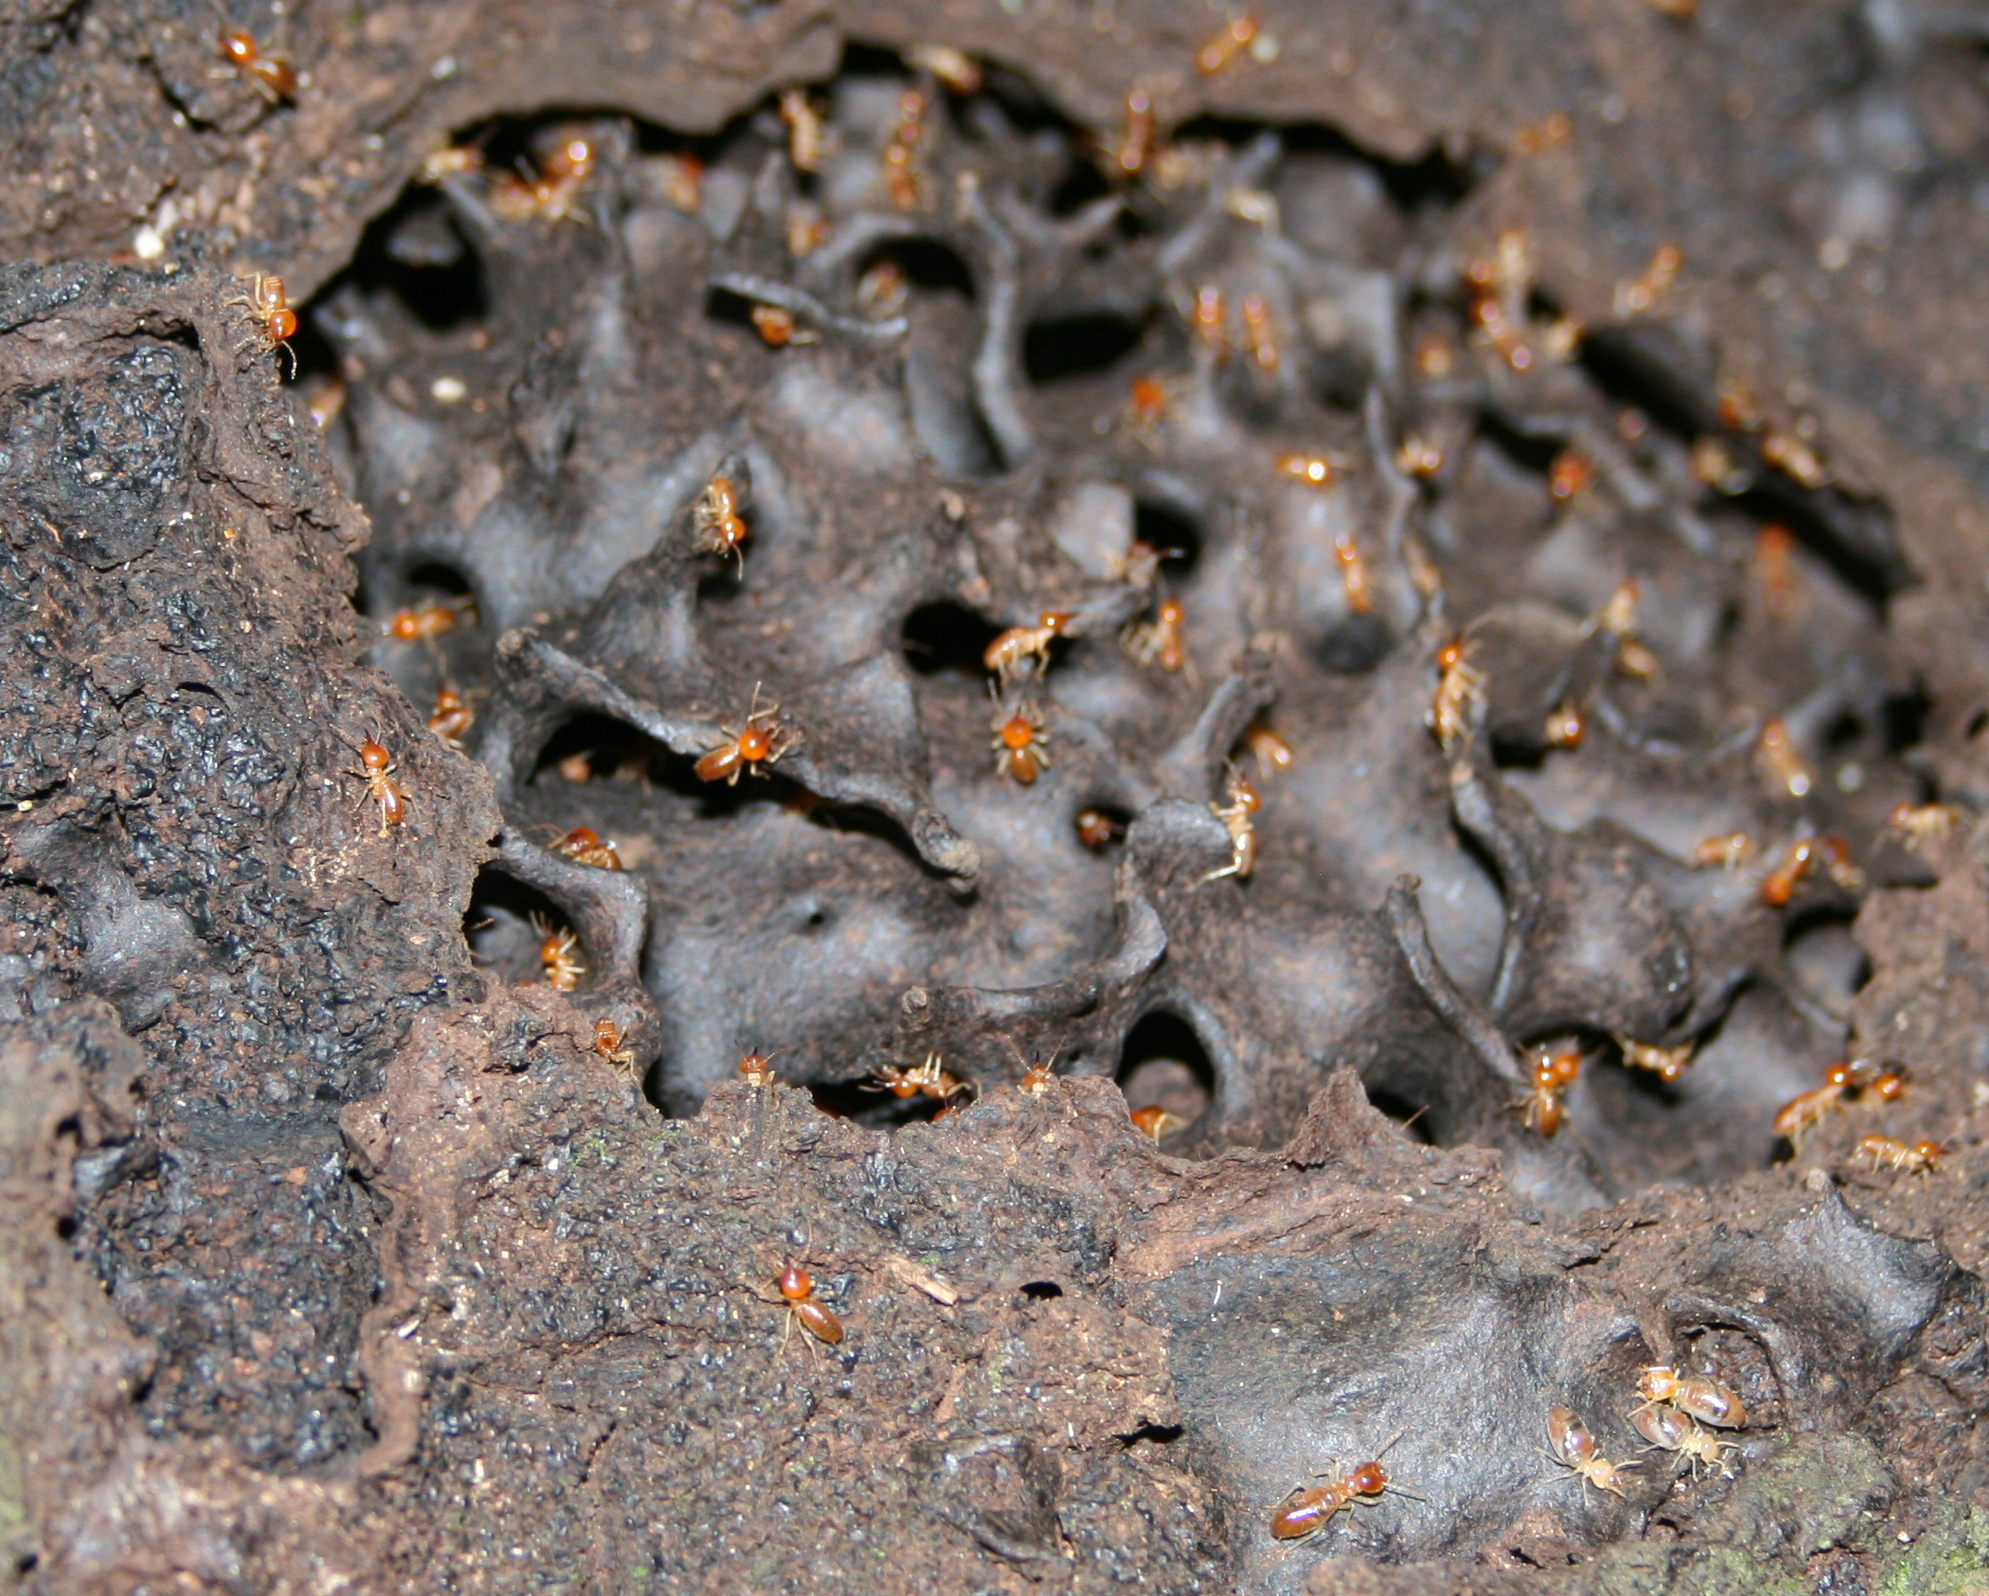 Termites in a mound